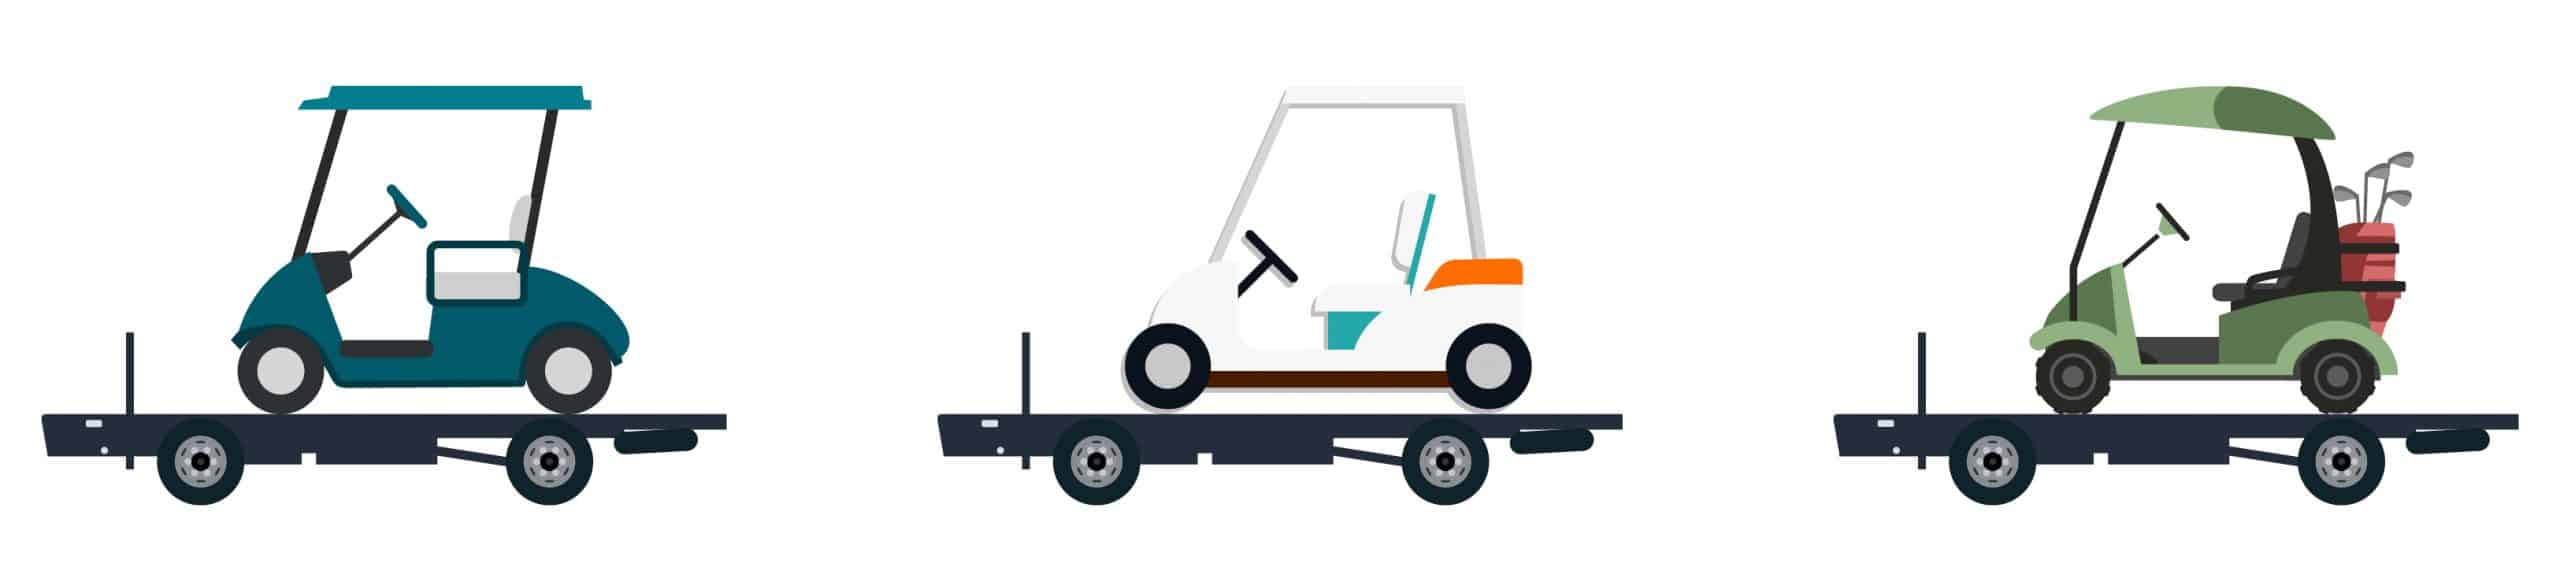 Towing Golf Cart on a Trailer - Weights